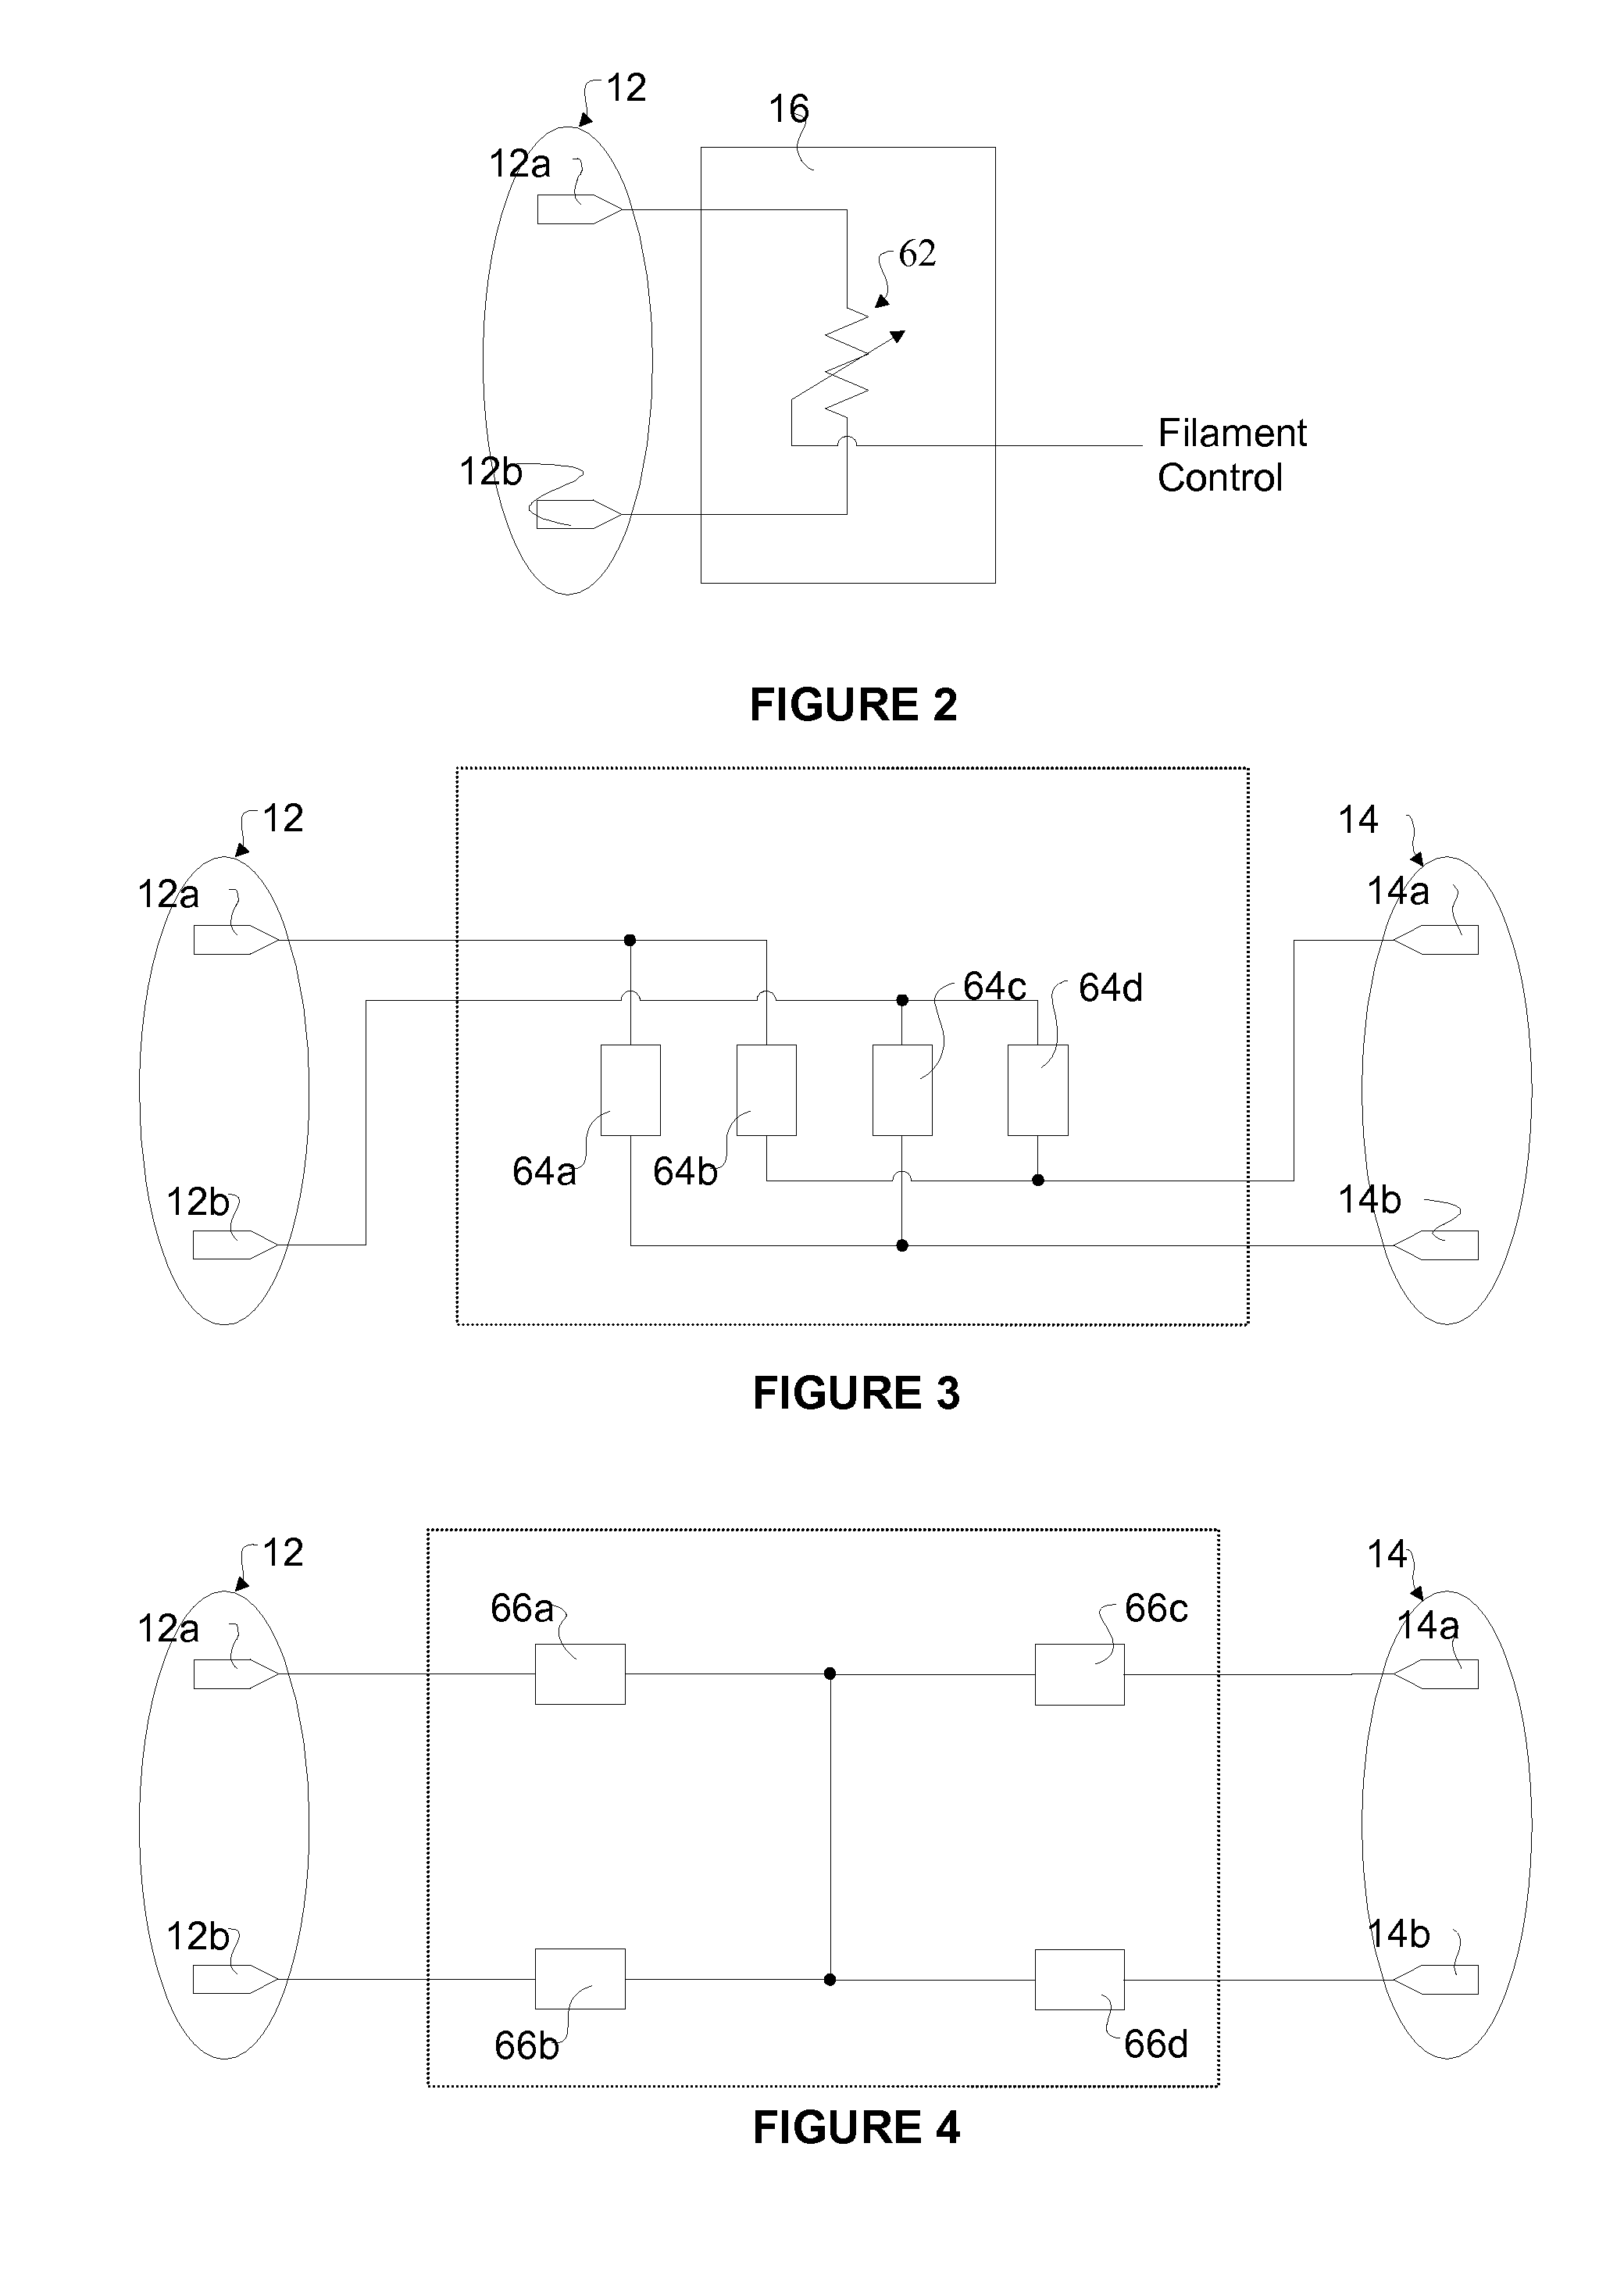 Impedance controlled electronic lamp circuit